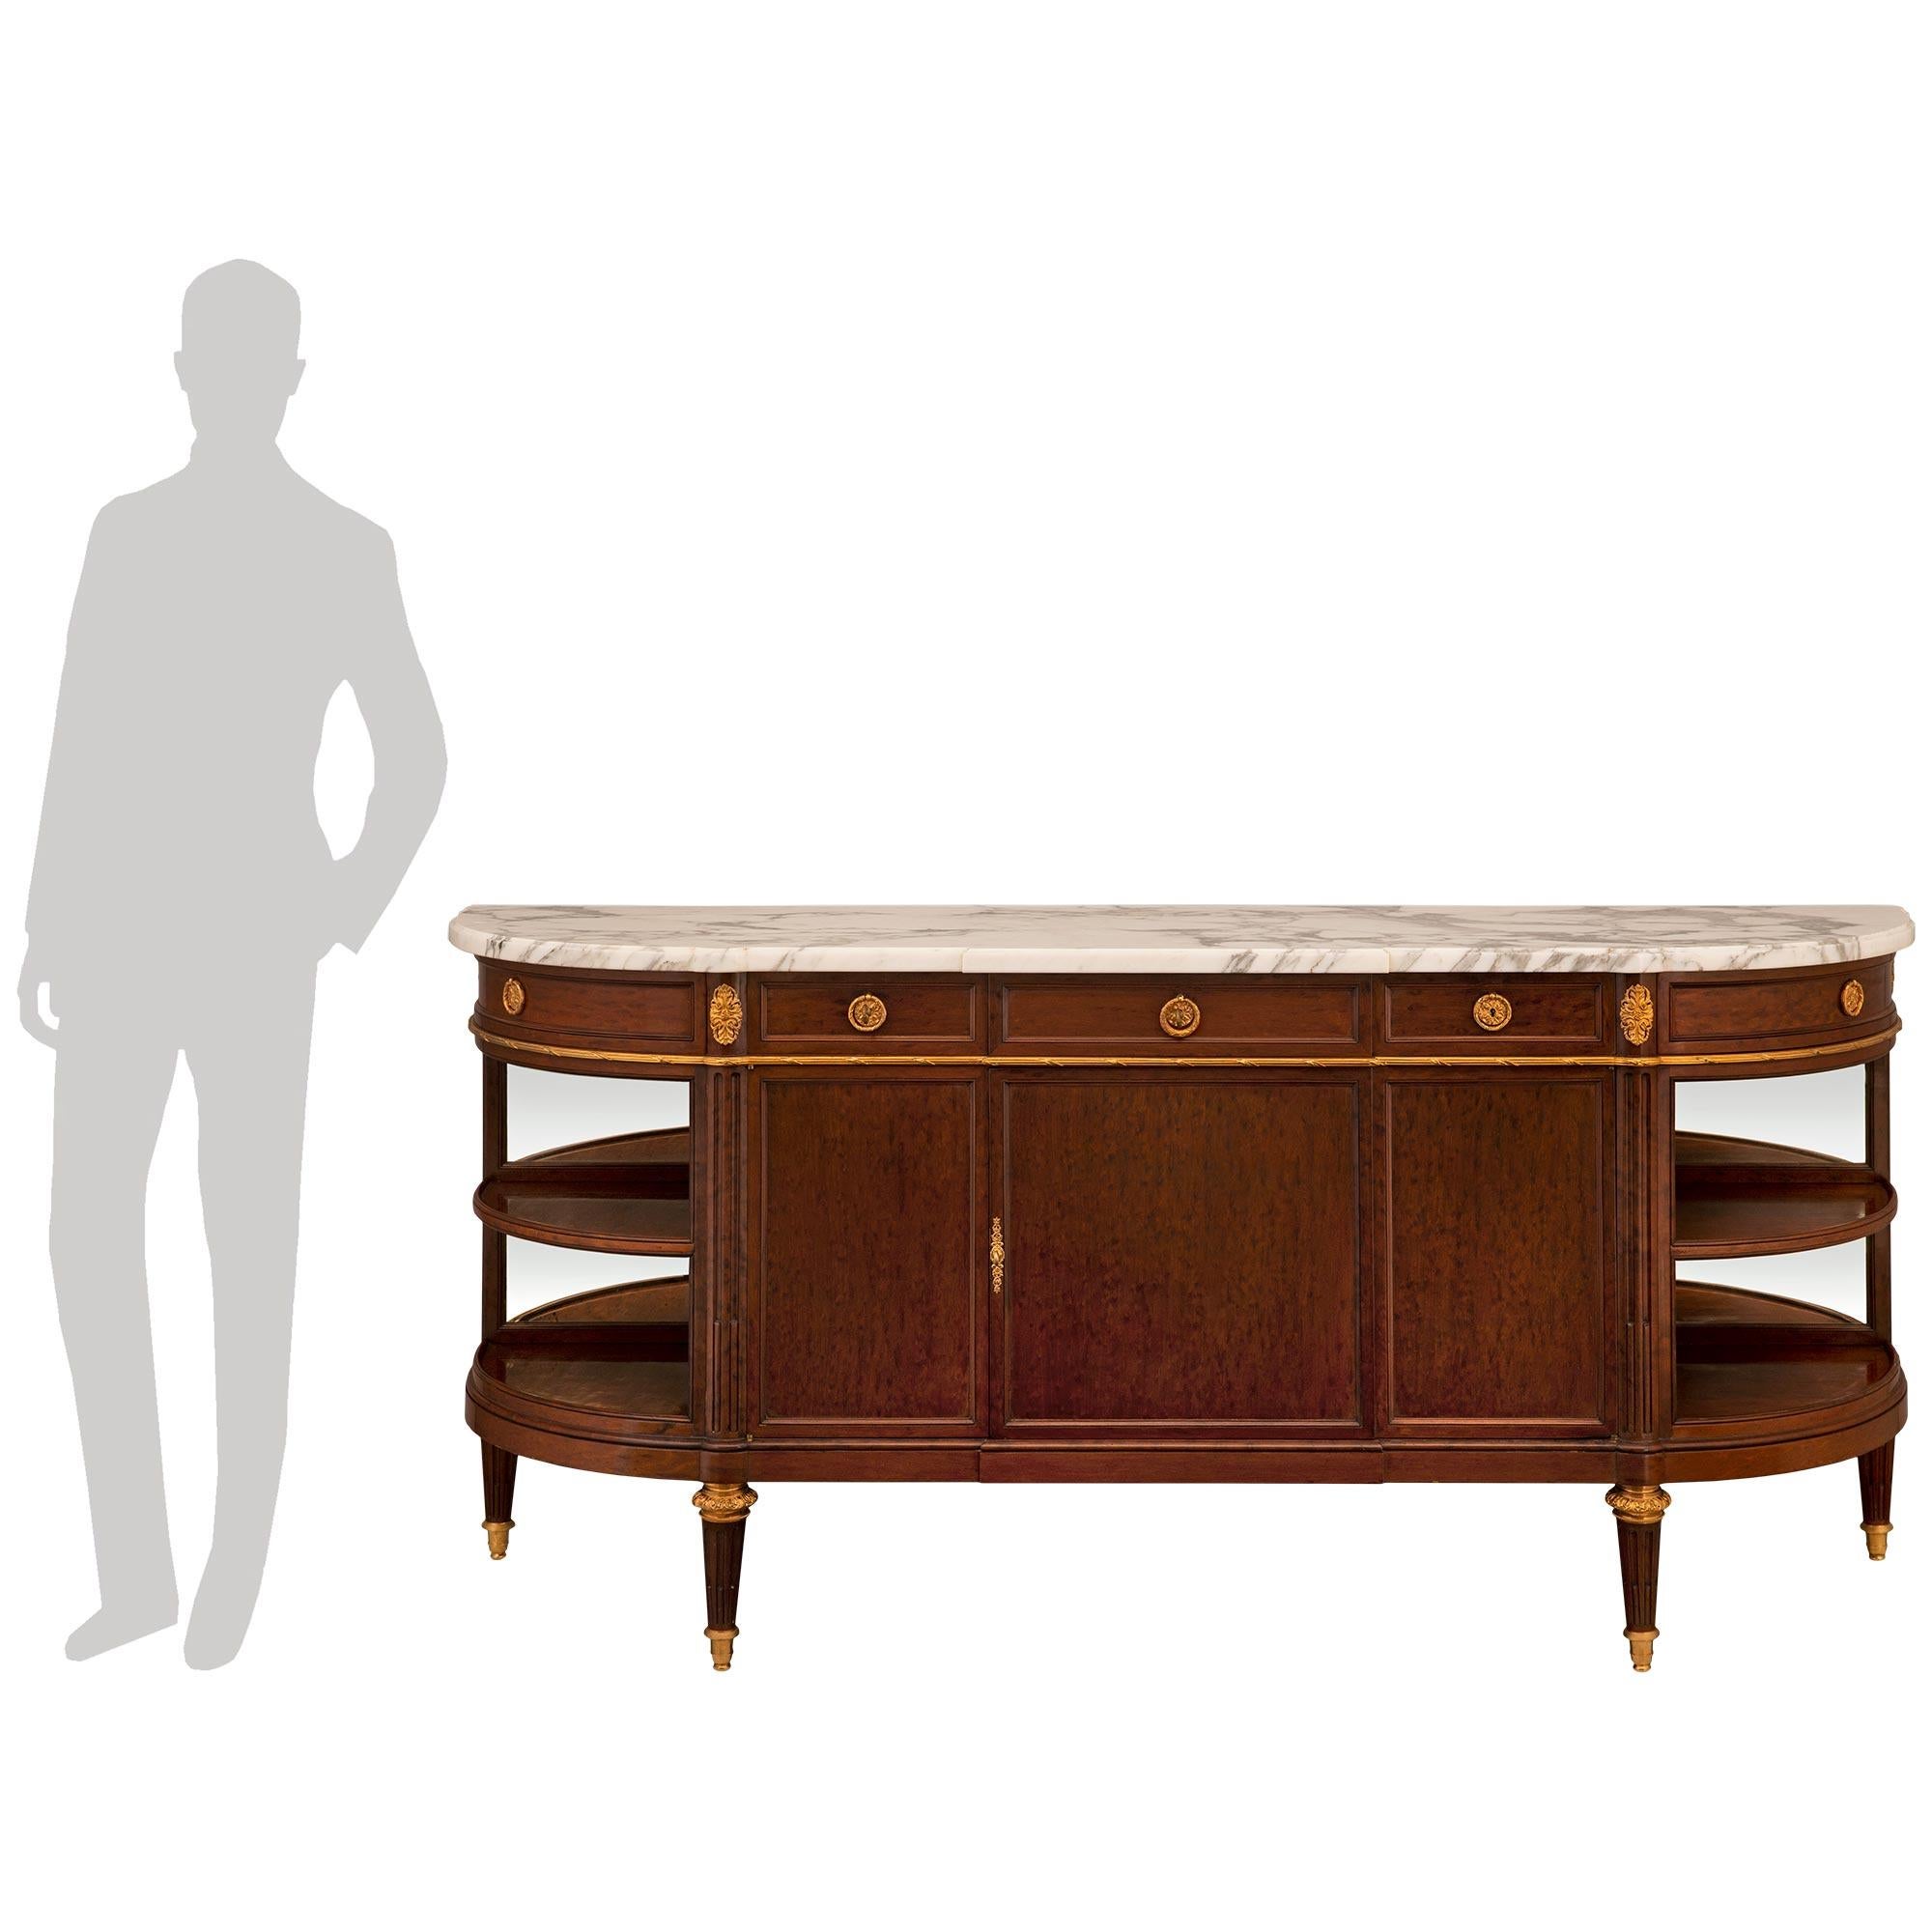 A most elegant French 19th century Louis XVI st. mouchette mahogany, ormolu and marble five drawer two door buffet. The buffet is raised by fine circular tapered fluted legs with ormolu sabots and fine decorative foliate top caps. At the center are